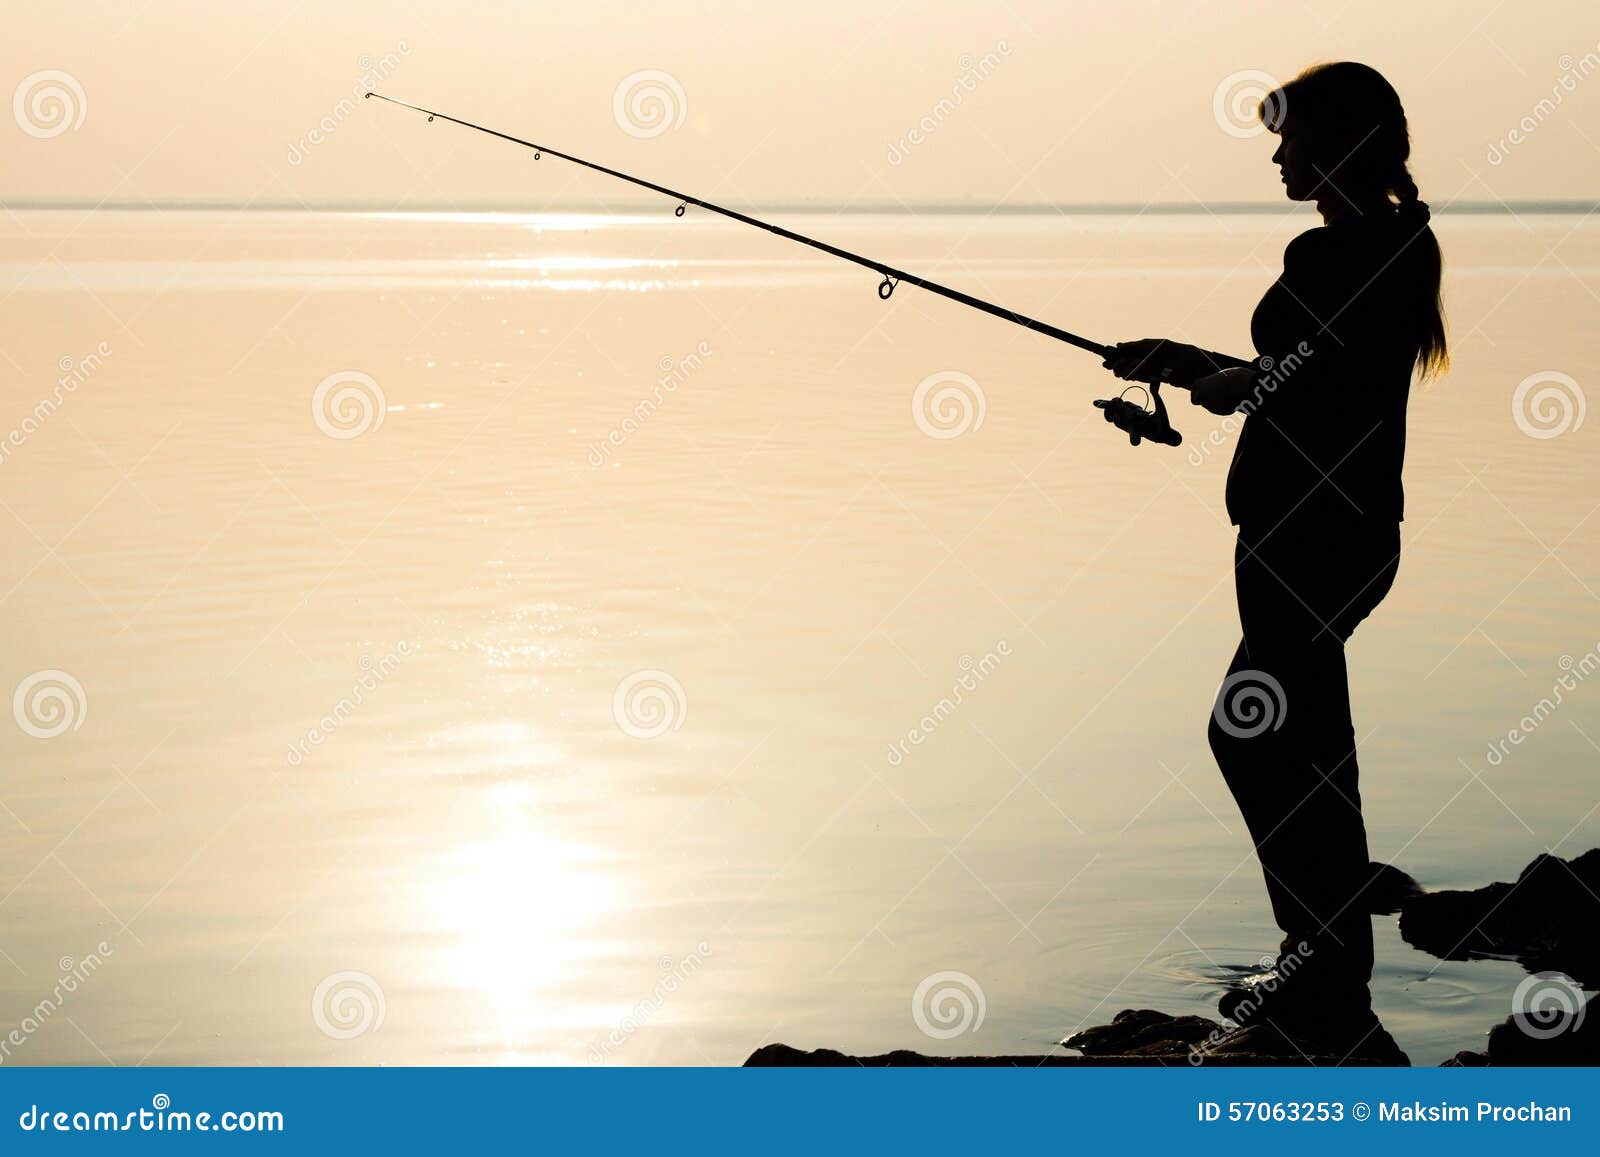 Download Silhouette Of A Young Girl Fishing At Sunset Stock Photo ...